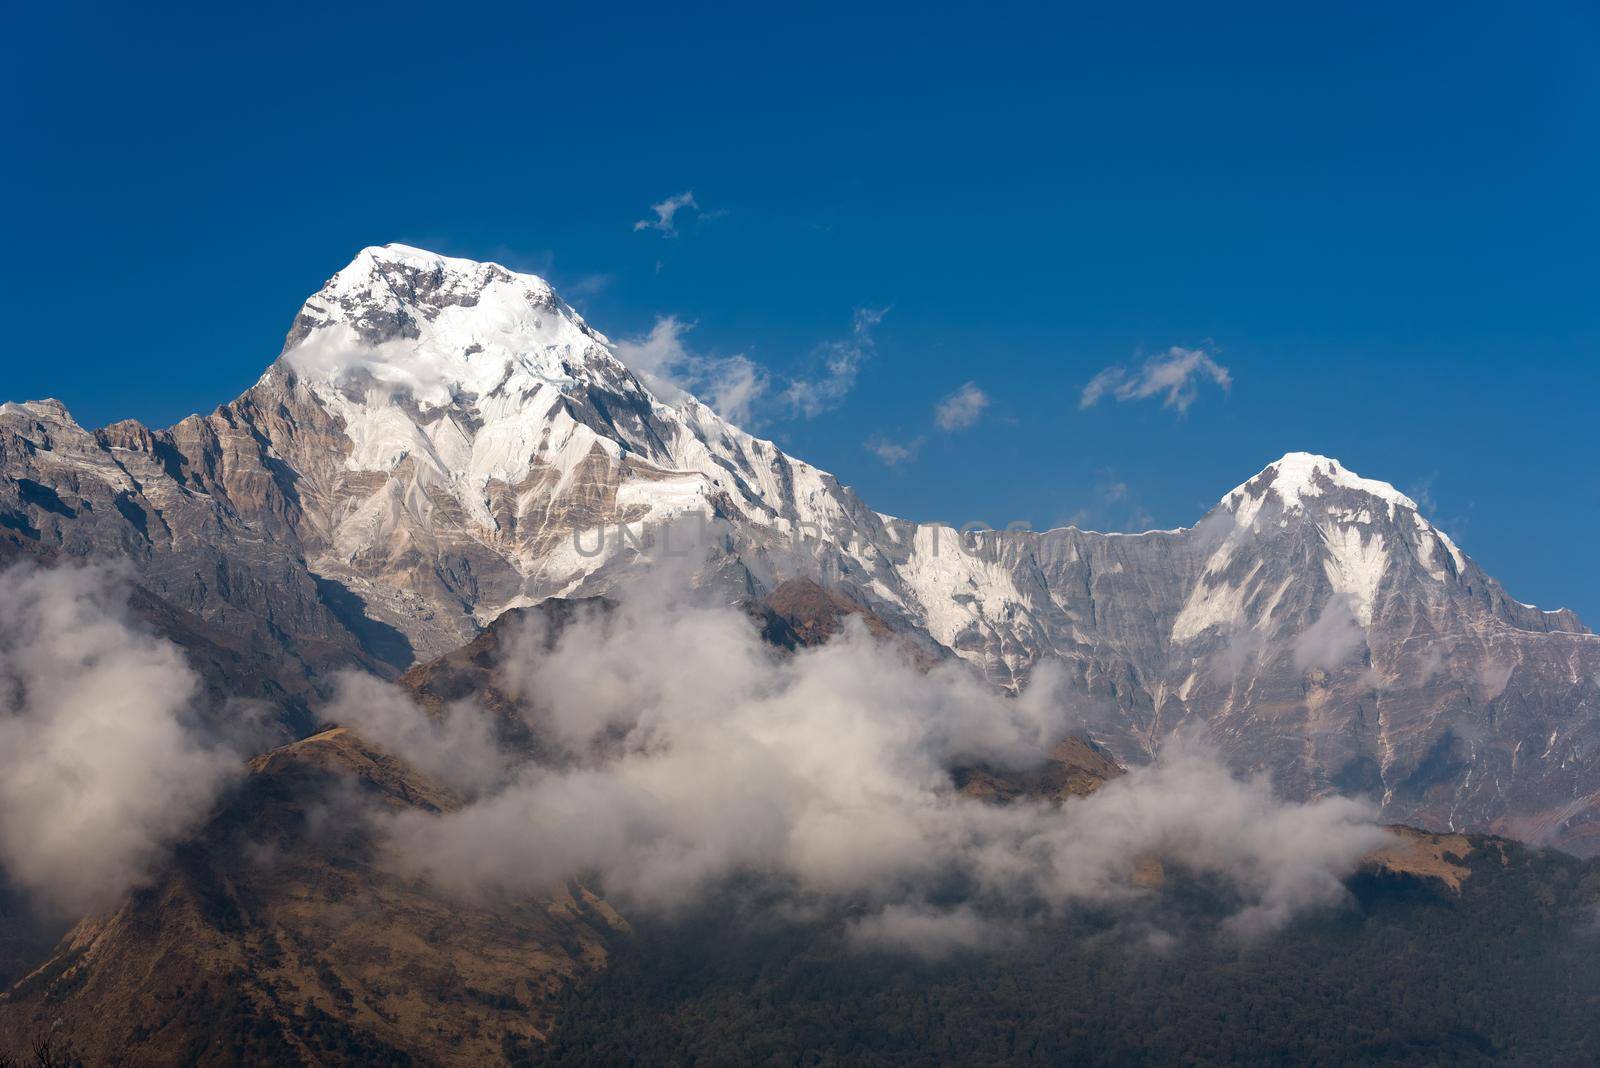 Annapurna South mountain peak with blue sky background in Nepal by Nuamfolio